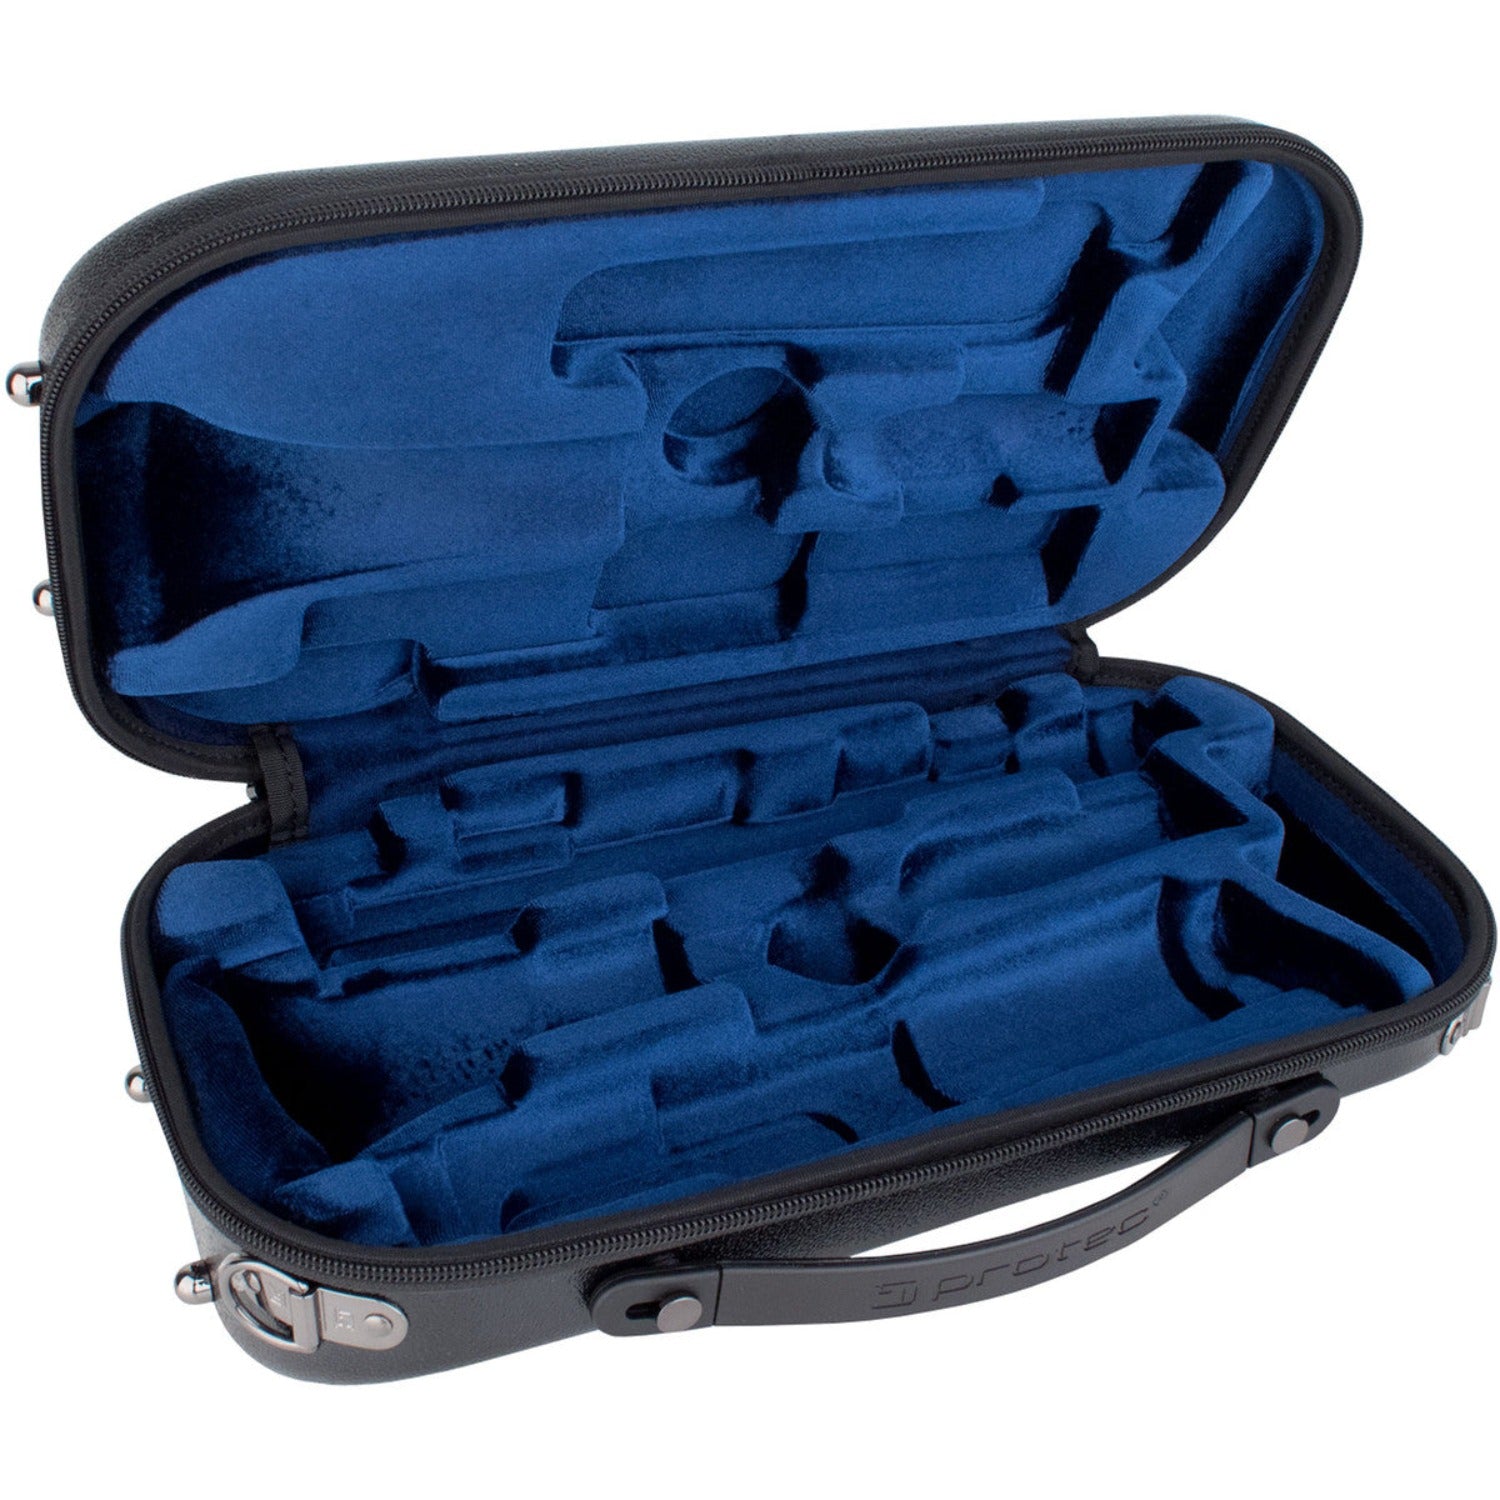 Protec Microzip clarinet case, open, empty, showing blue interior, on white background